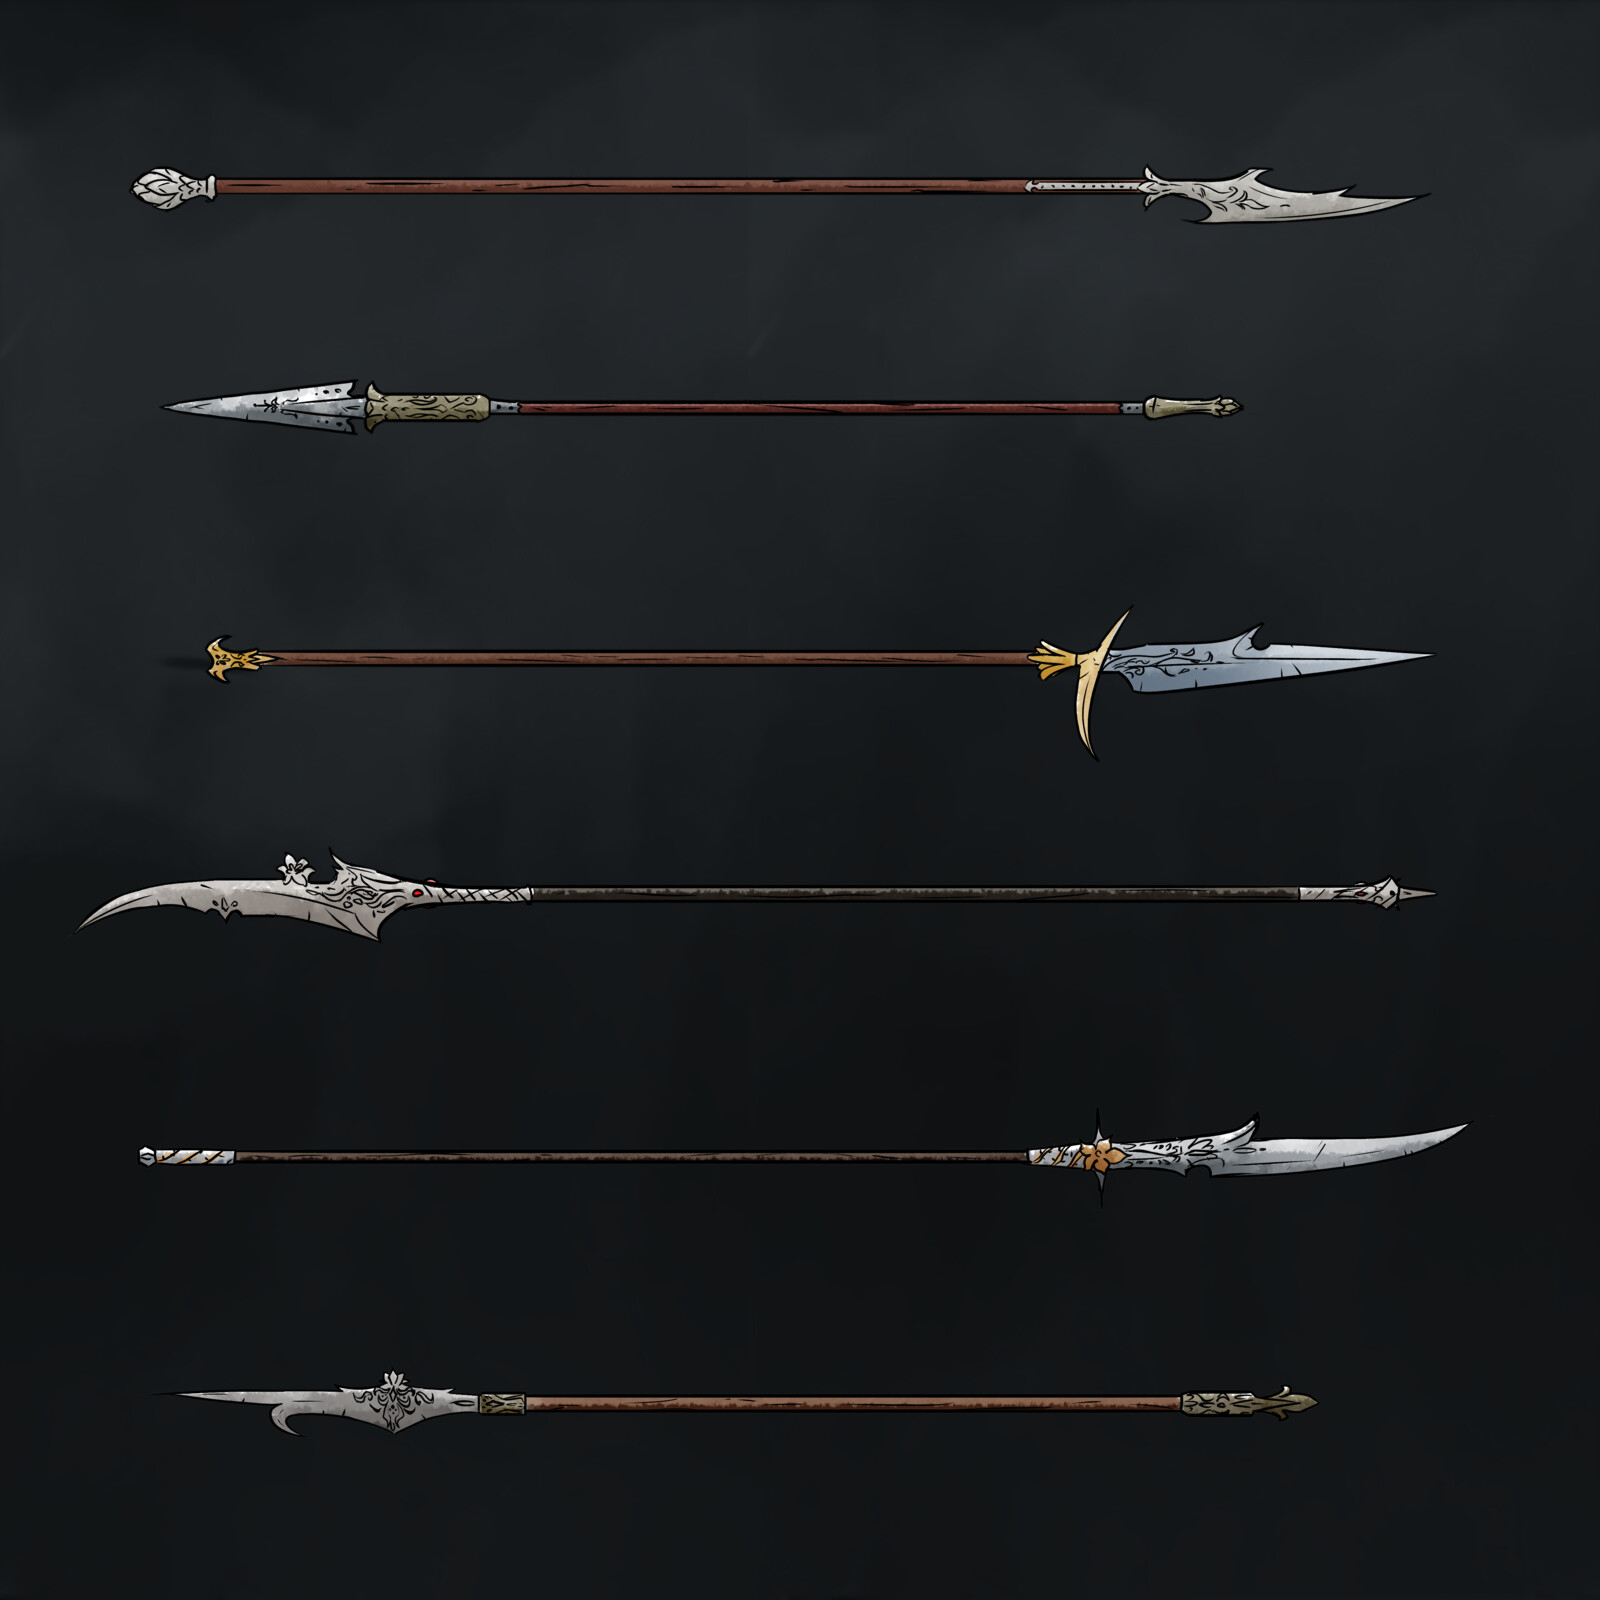 Warden Spear Concepts